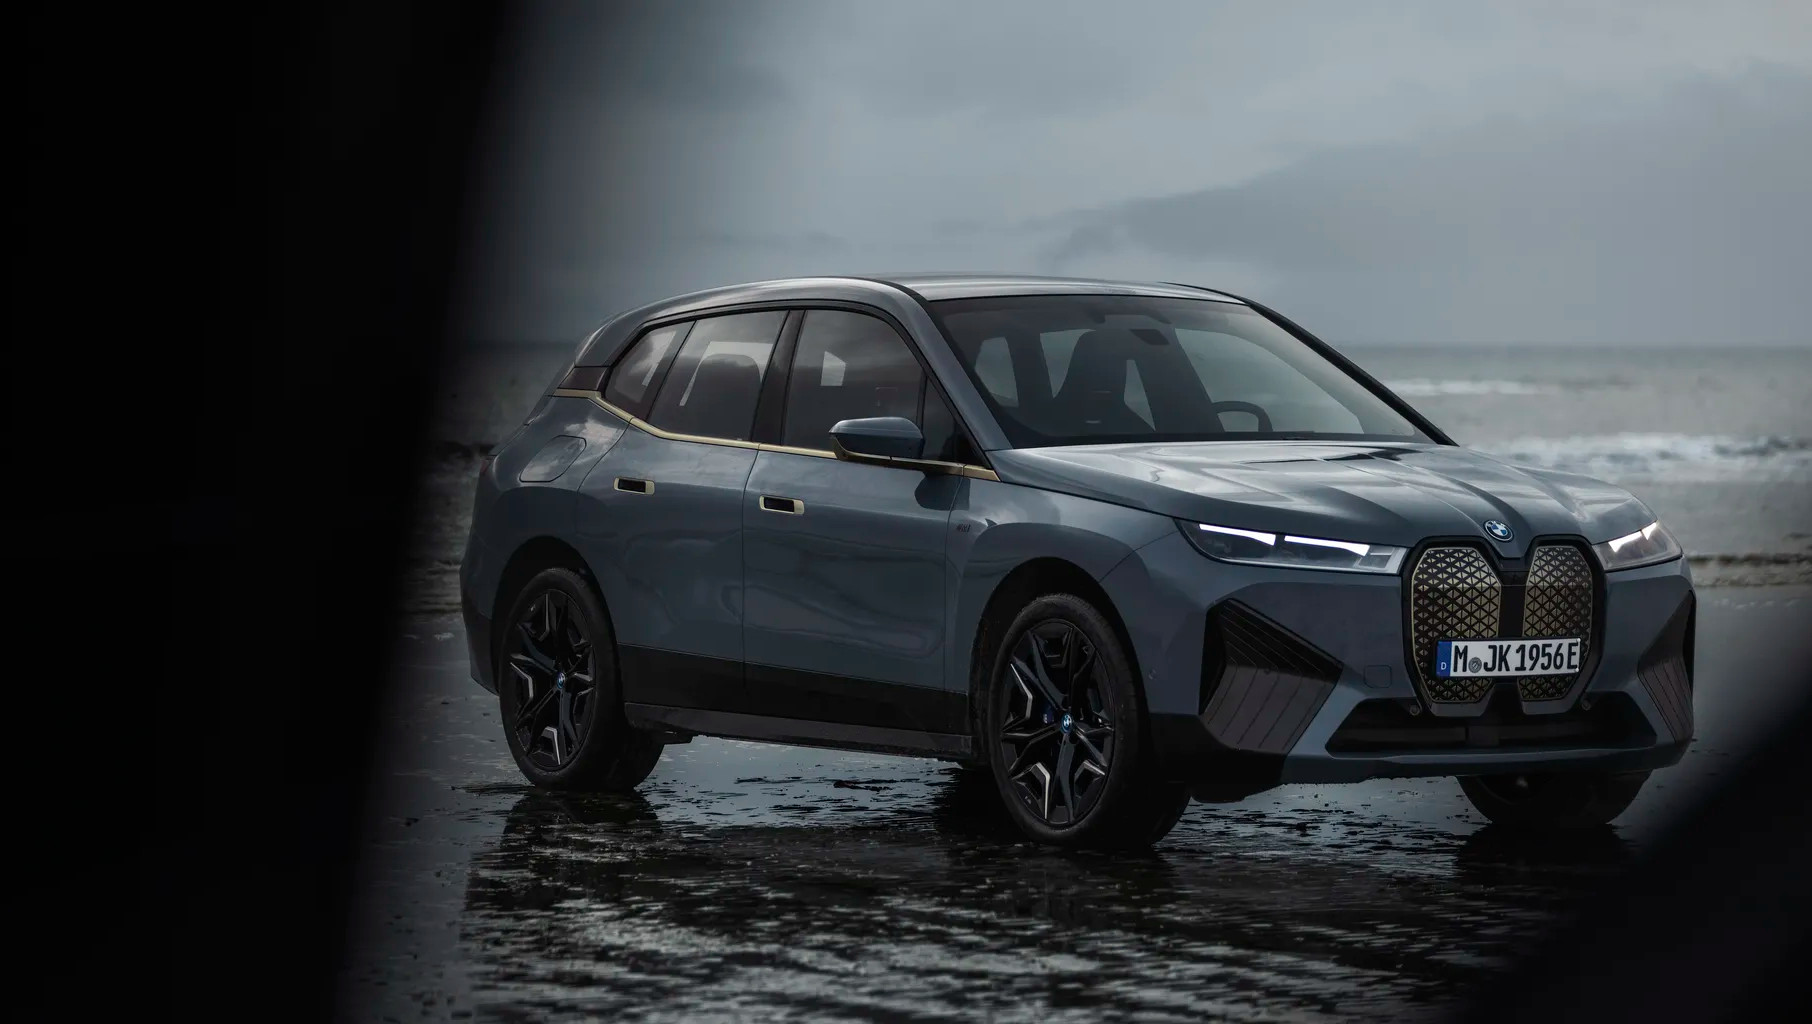 Dual 619 hp, 566 km range and 250 km / h top speed starting at £ 111,905 - BWM ix M60 electric crossover unveiled